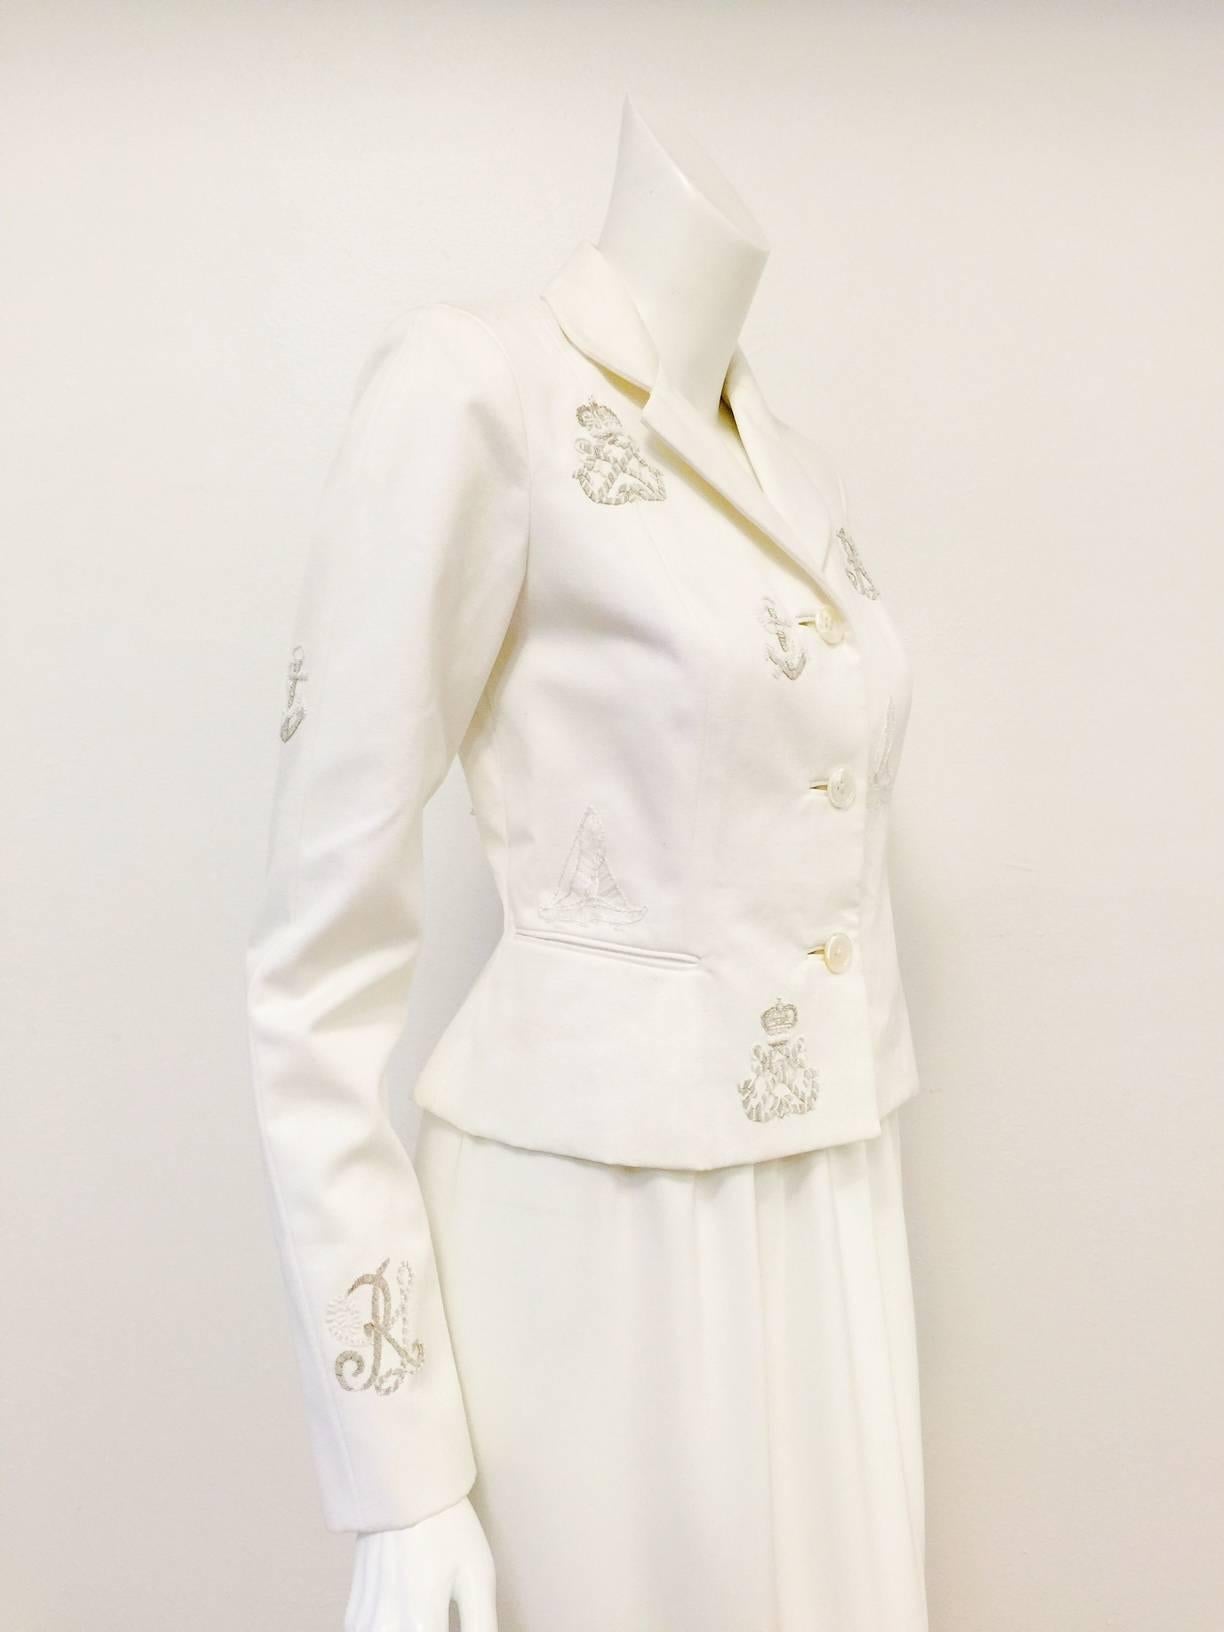 Embroidered white cotton Jacket is truly worthy of Ralph Lauren's Collection!  Features exquisite cotton fabric,fitted, cropped silhouette, and two sewn welt pockets.  Notch lapel, slightly padded shouder, and three 